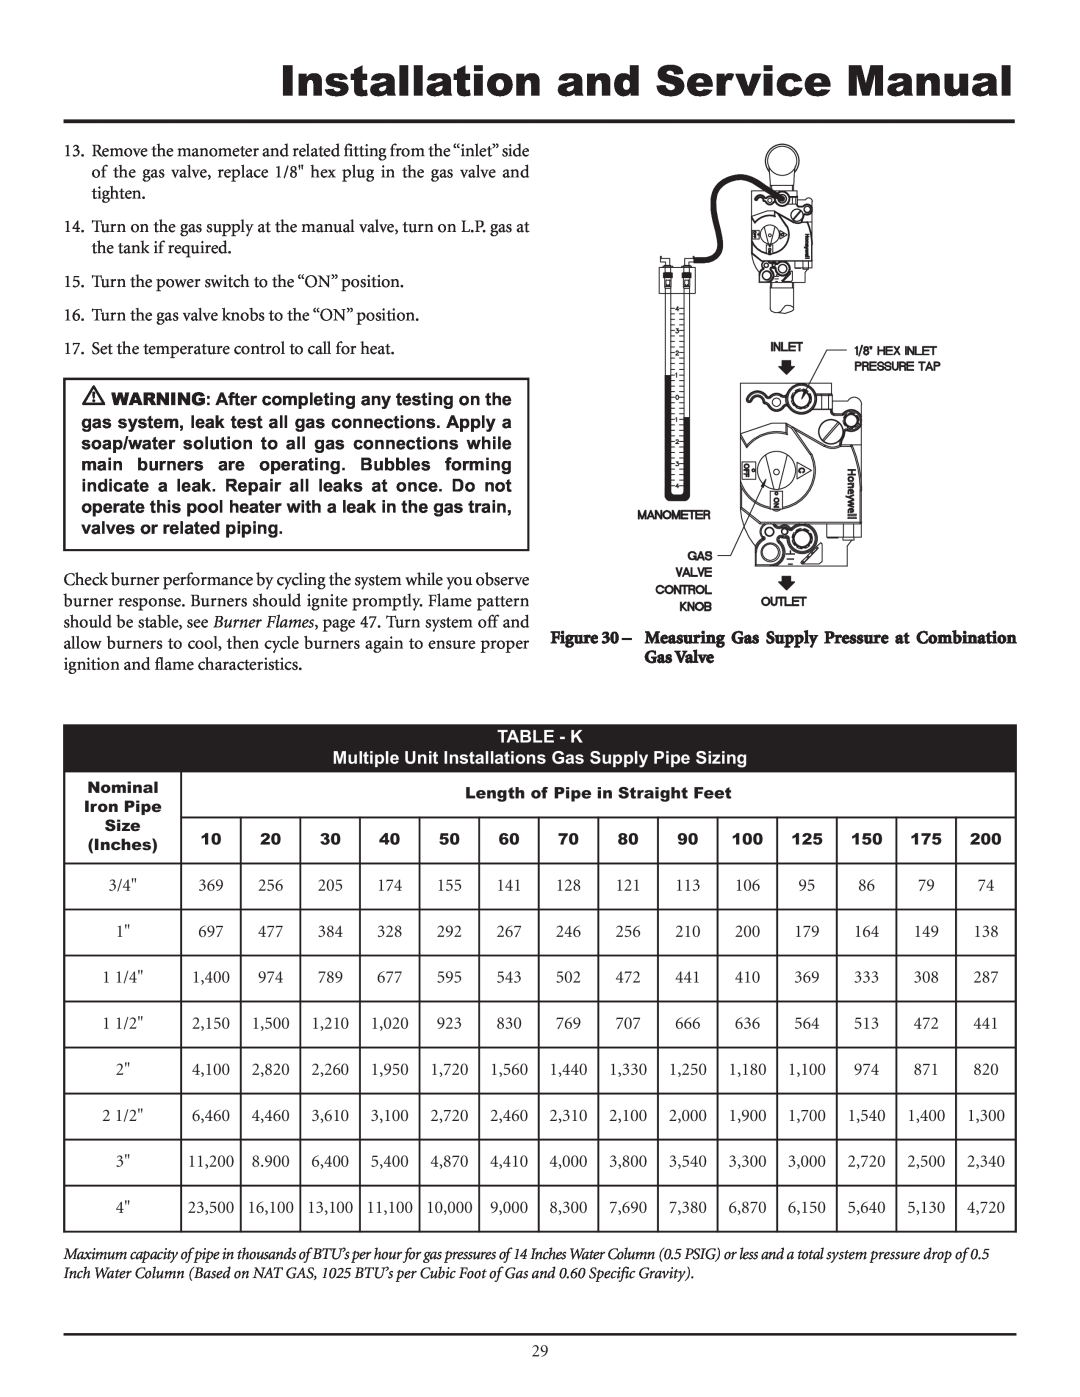 Lochinvar F0600187510 service manual Table - K, Installation and Service Manual, Gas Valve 